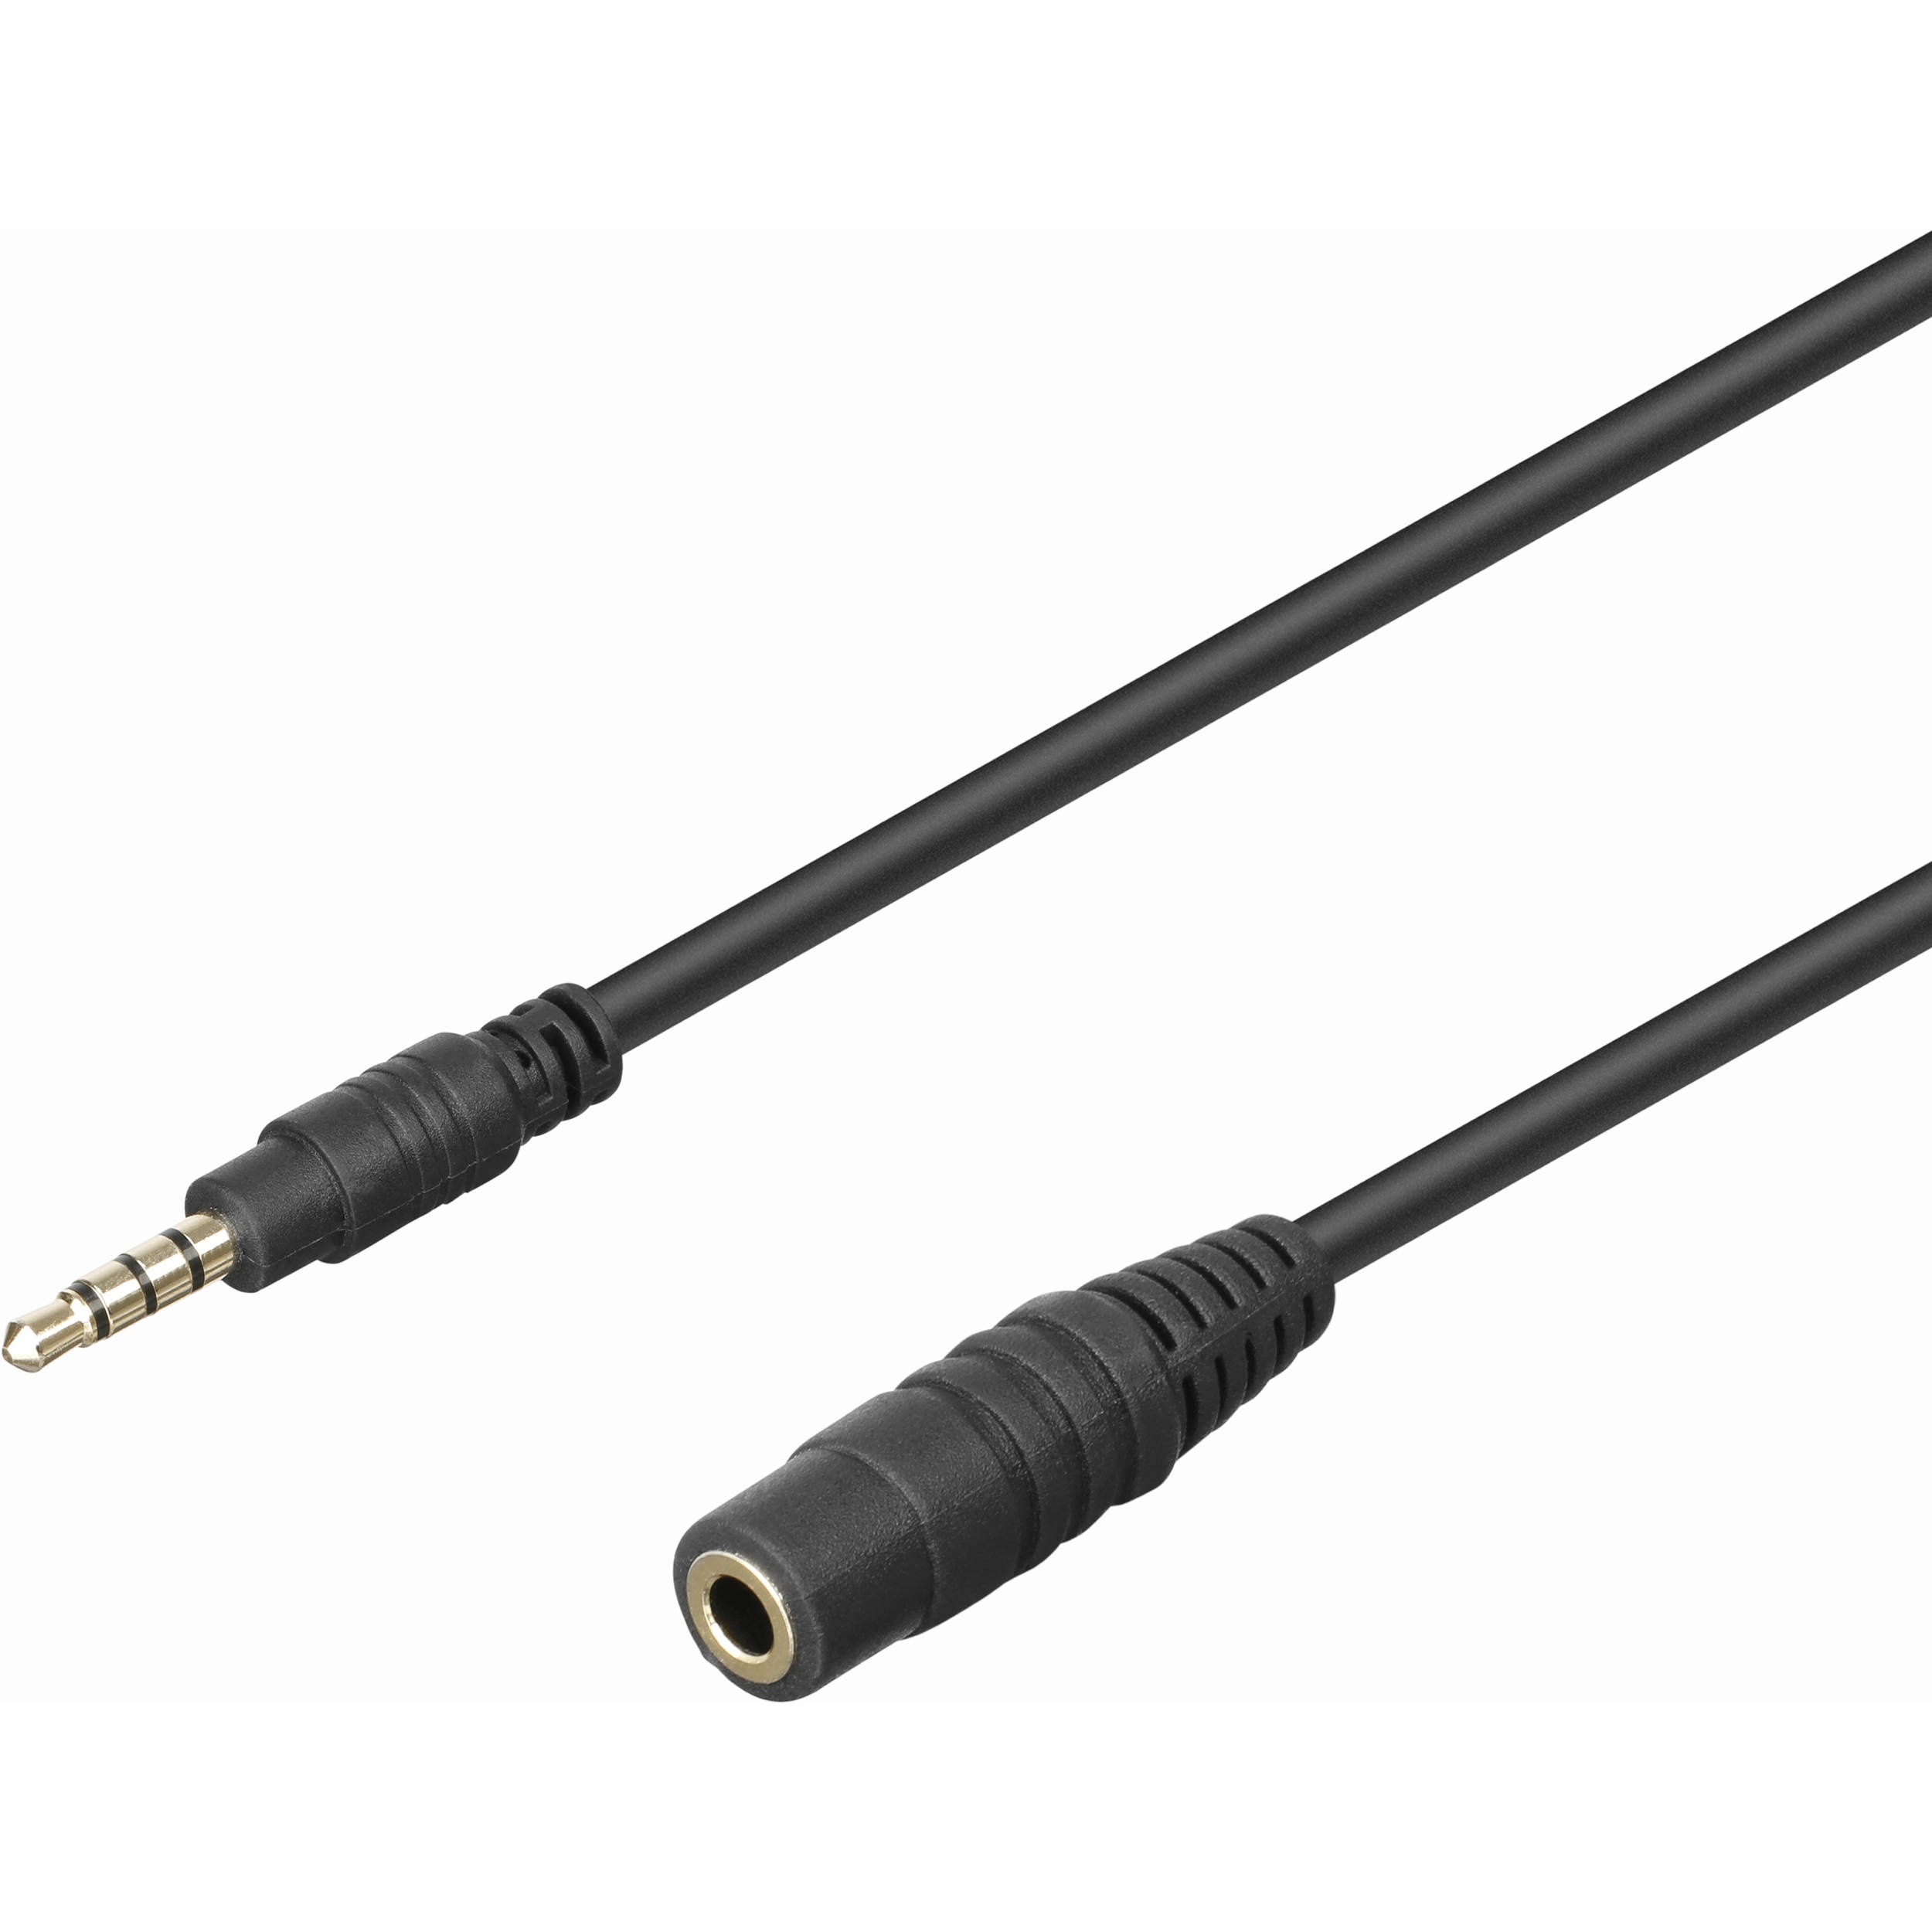 Saramonic SR-SC5000 3.5mm TRRS Microphone Extension Cable for Smartphones (5m)